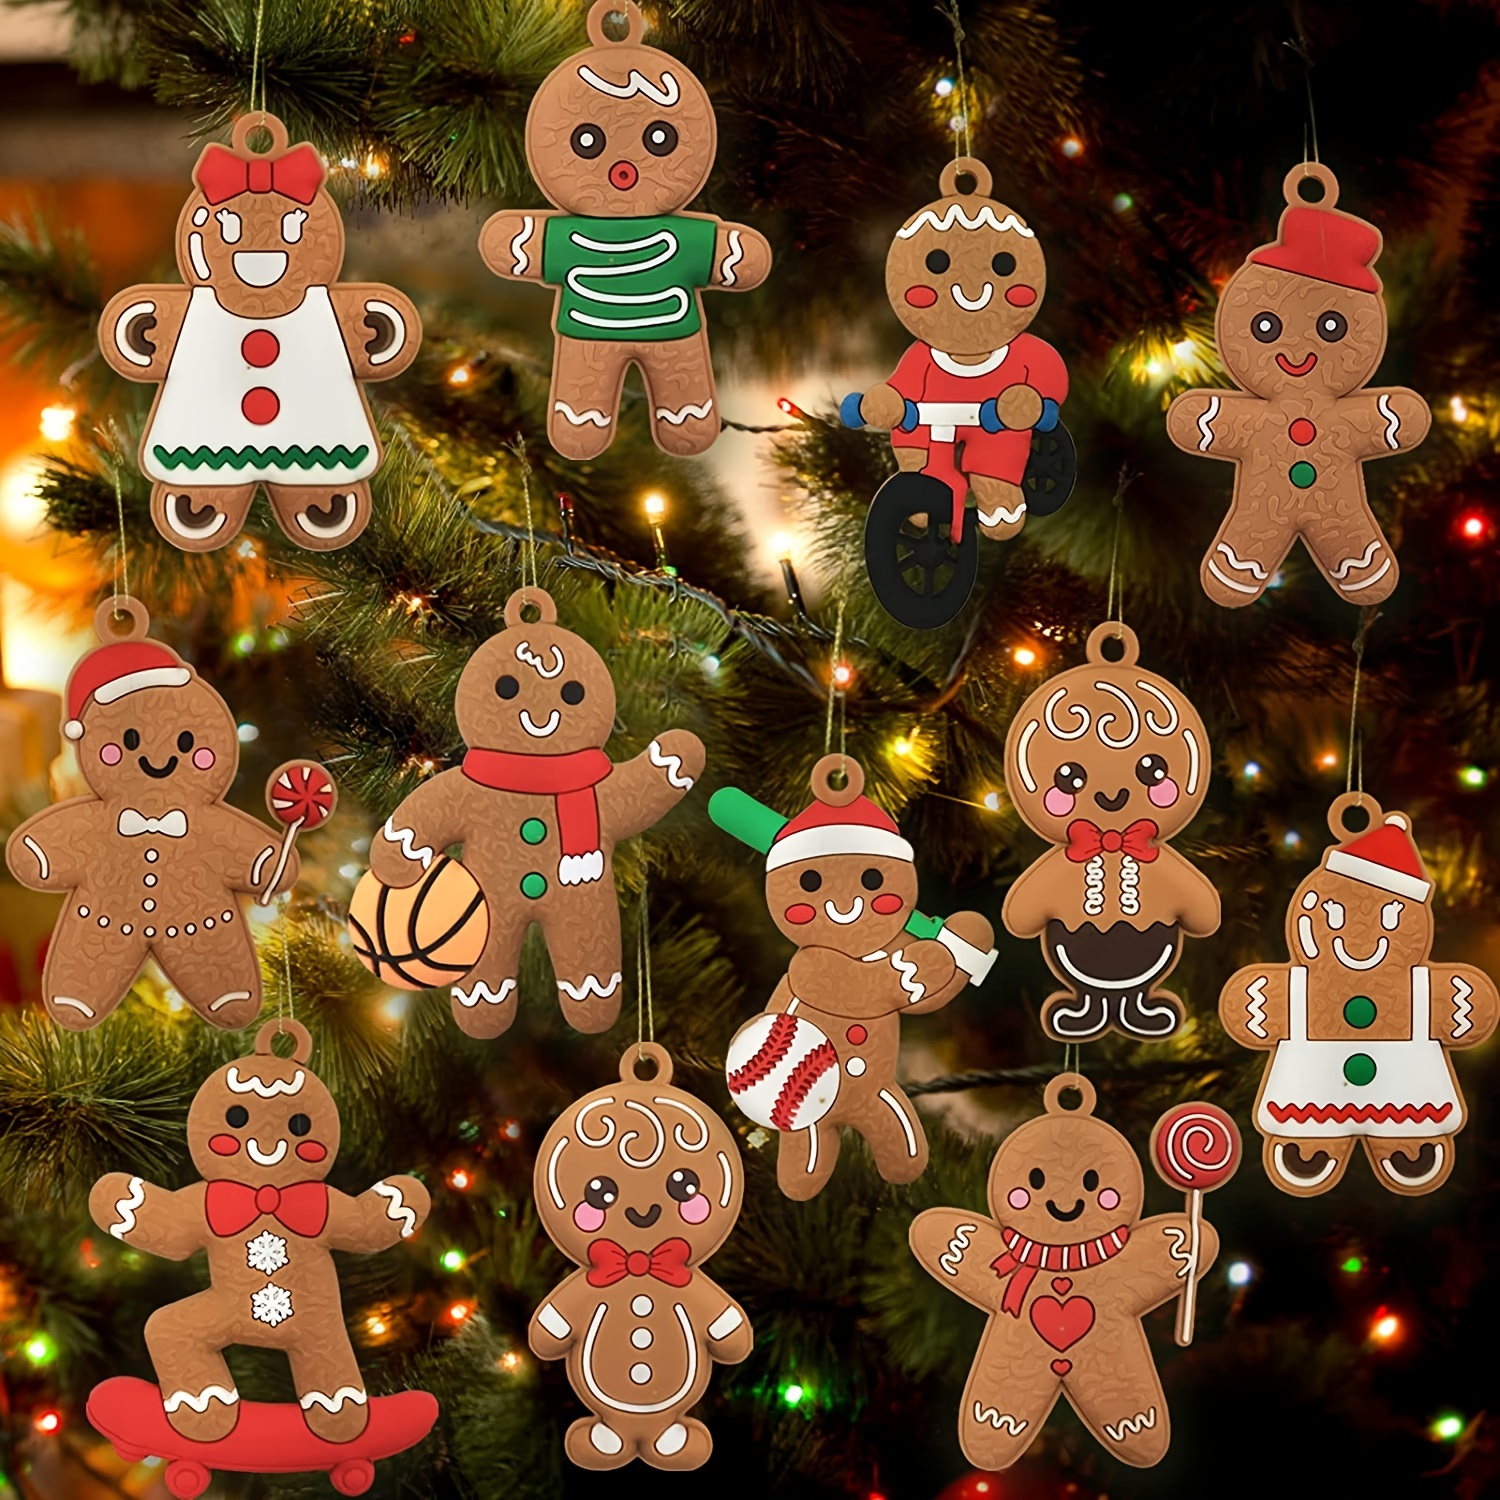 12pcs Christmas Gingerbread Man Ornaments for Tree Decorations